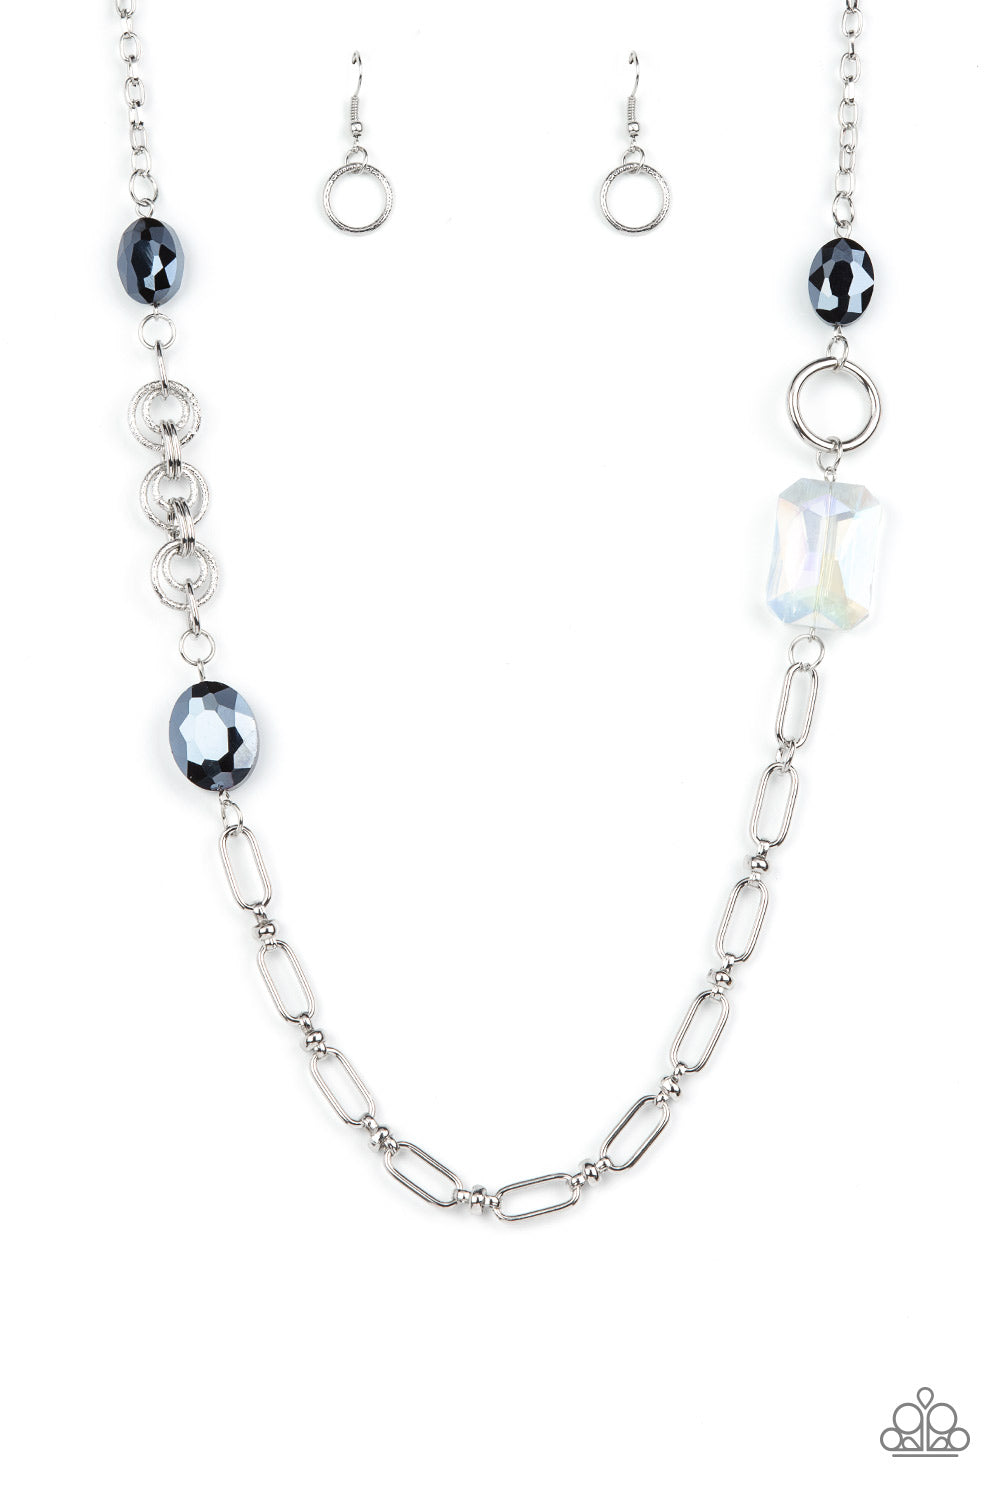 Famous and Fabulous - Blue - Paparazzi - A mismatched assortment of oval, round, textured, and silver hoops haphazardly link into a chaotic chain below the collar. Featuring oval and emerald style cuts, oversized metallic blue and iridescent gems sporadically adorn the chain for a glitzy finish.